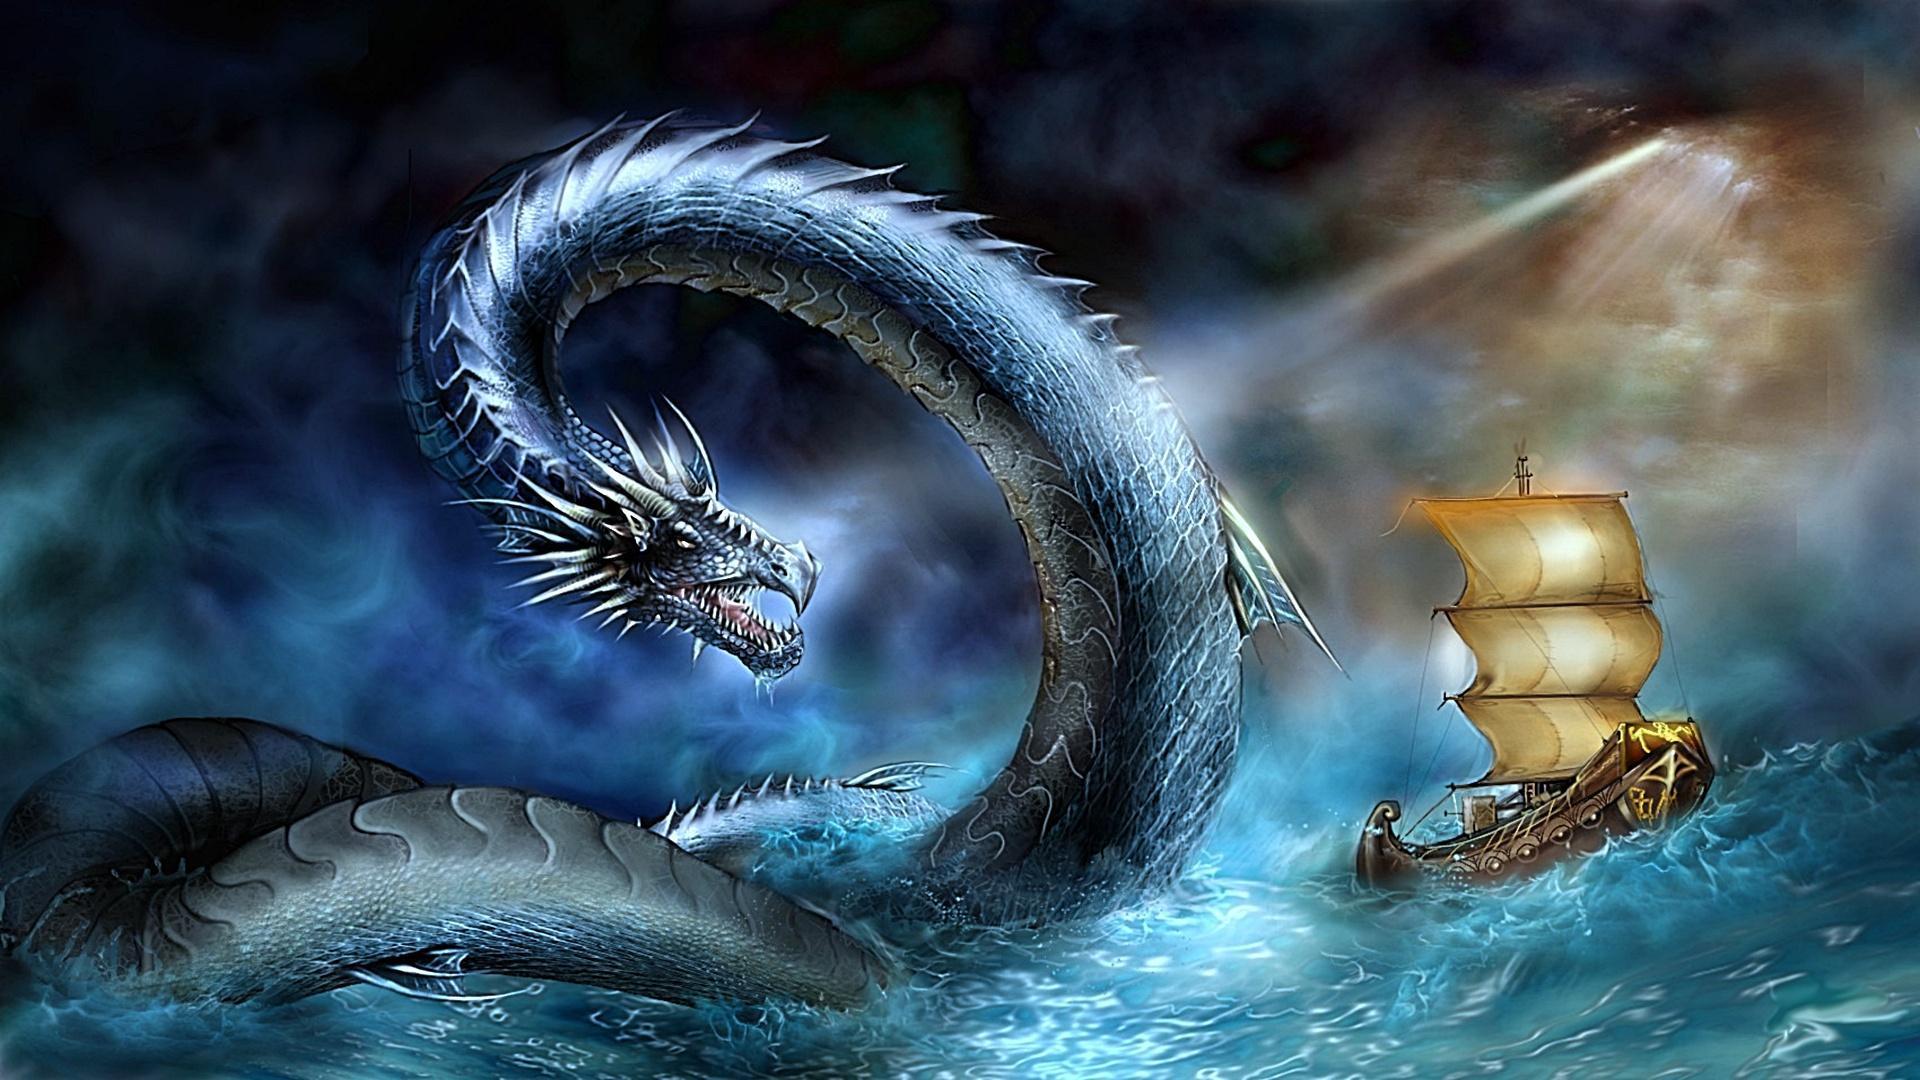 Image For > Dragons Wallpapers 3d